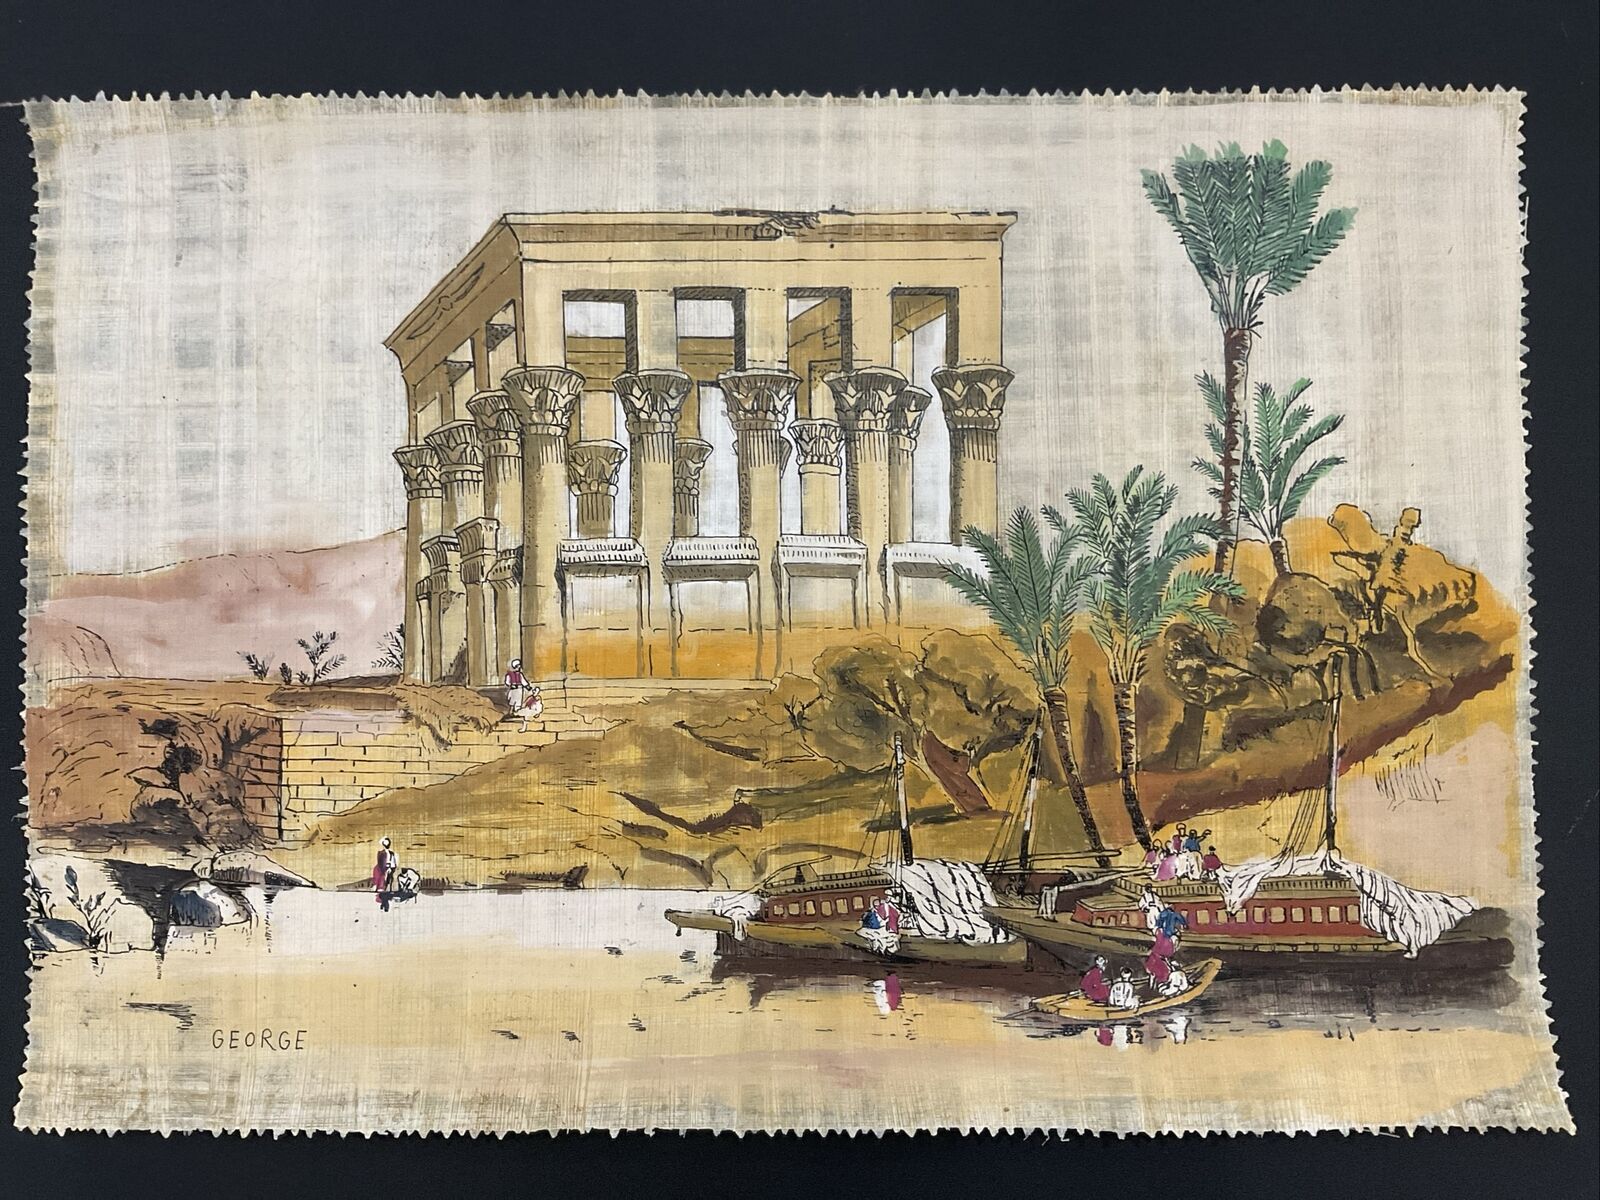 Rare Hand Painted Ancient Egyptian Papyrus-Philae Temple, southern Egypt-24x16”